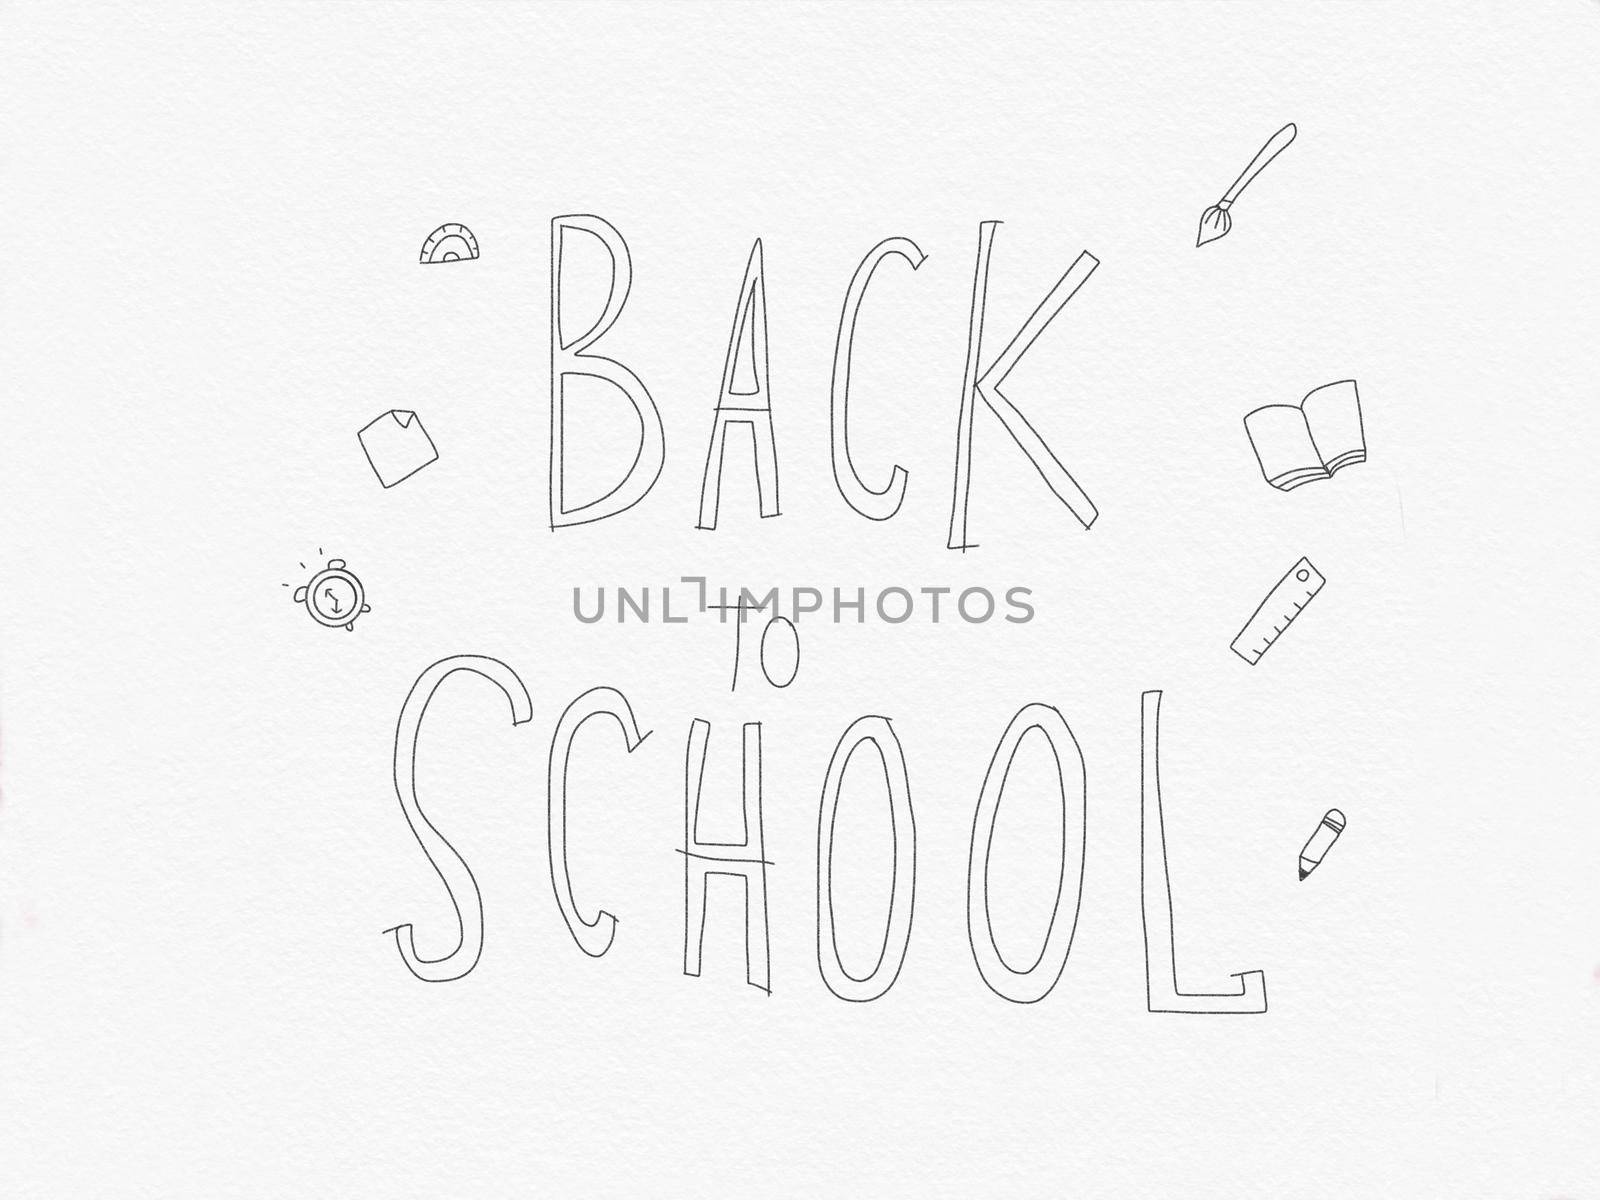 Back to school handwriting pencil sketch on paper background illustration, doodle style